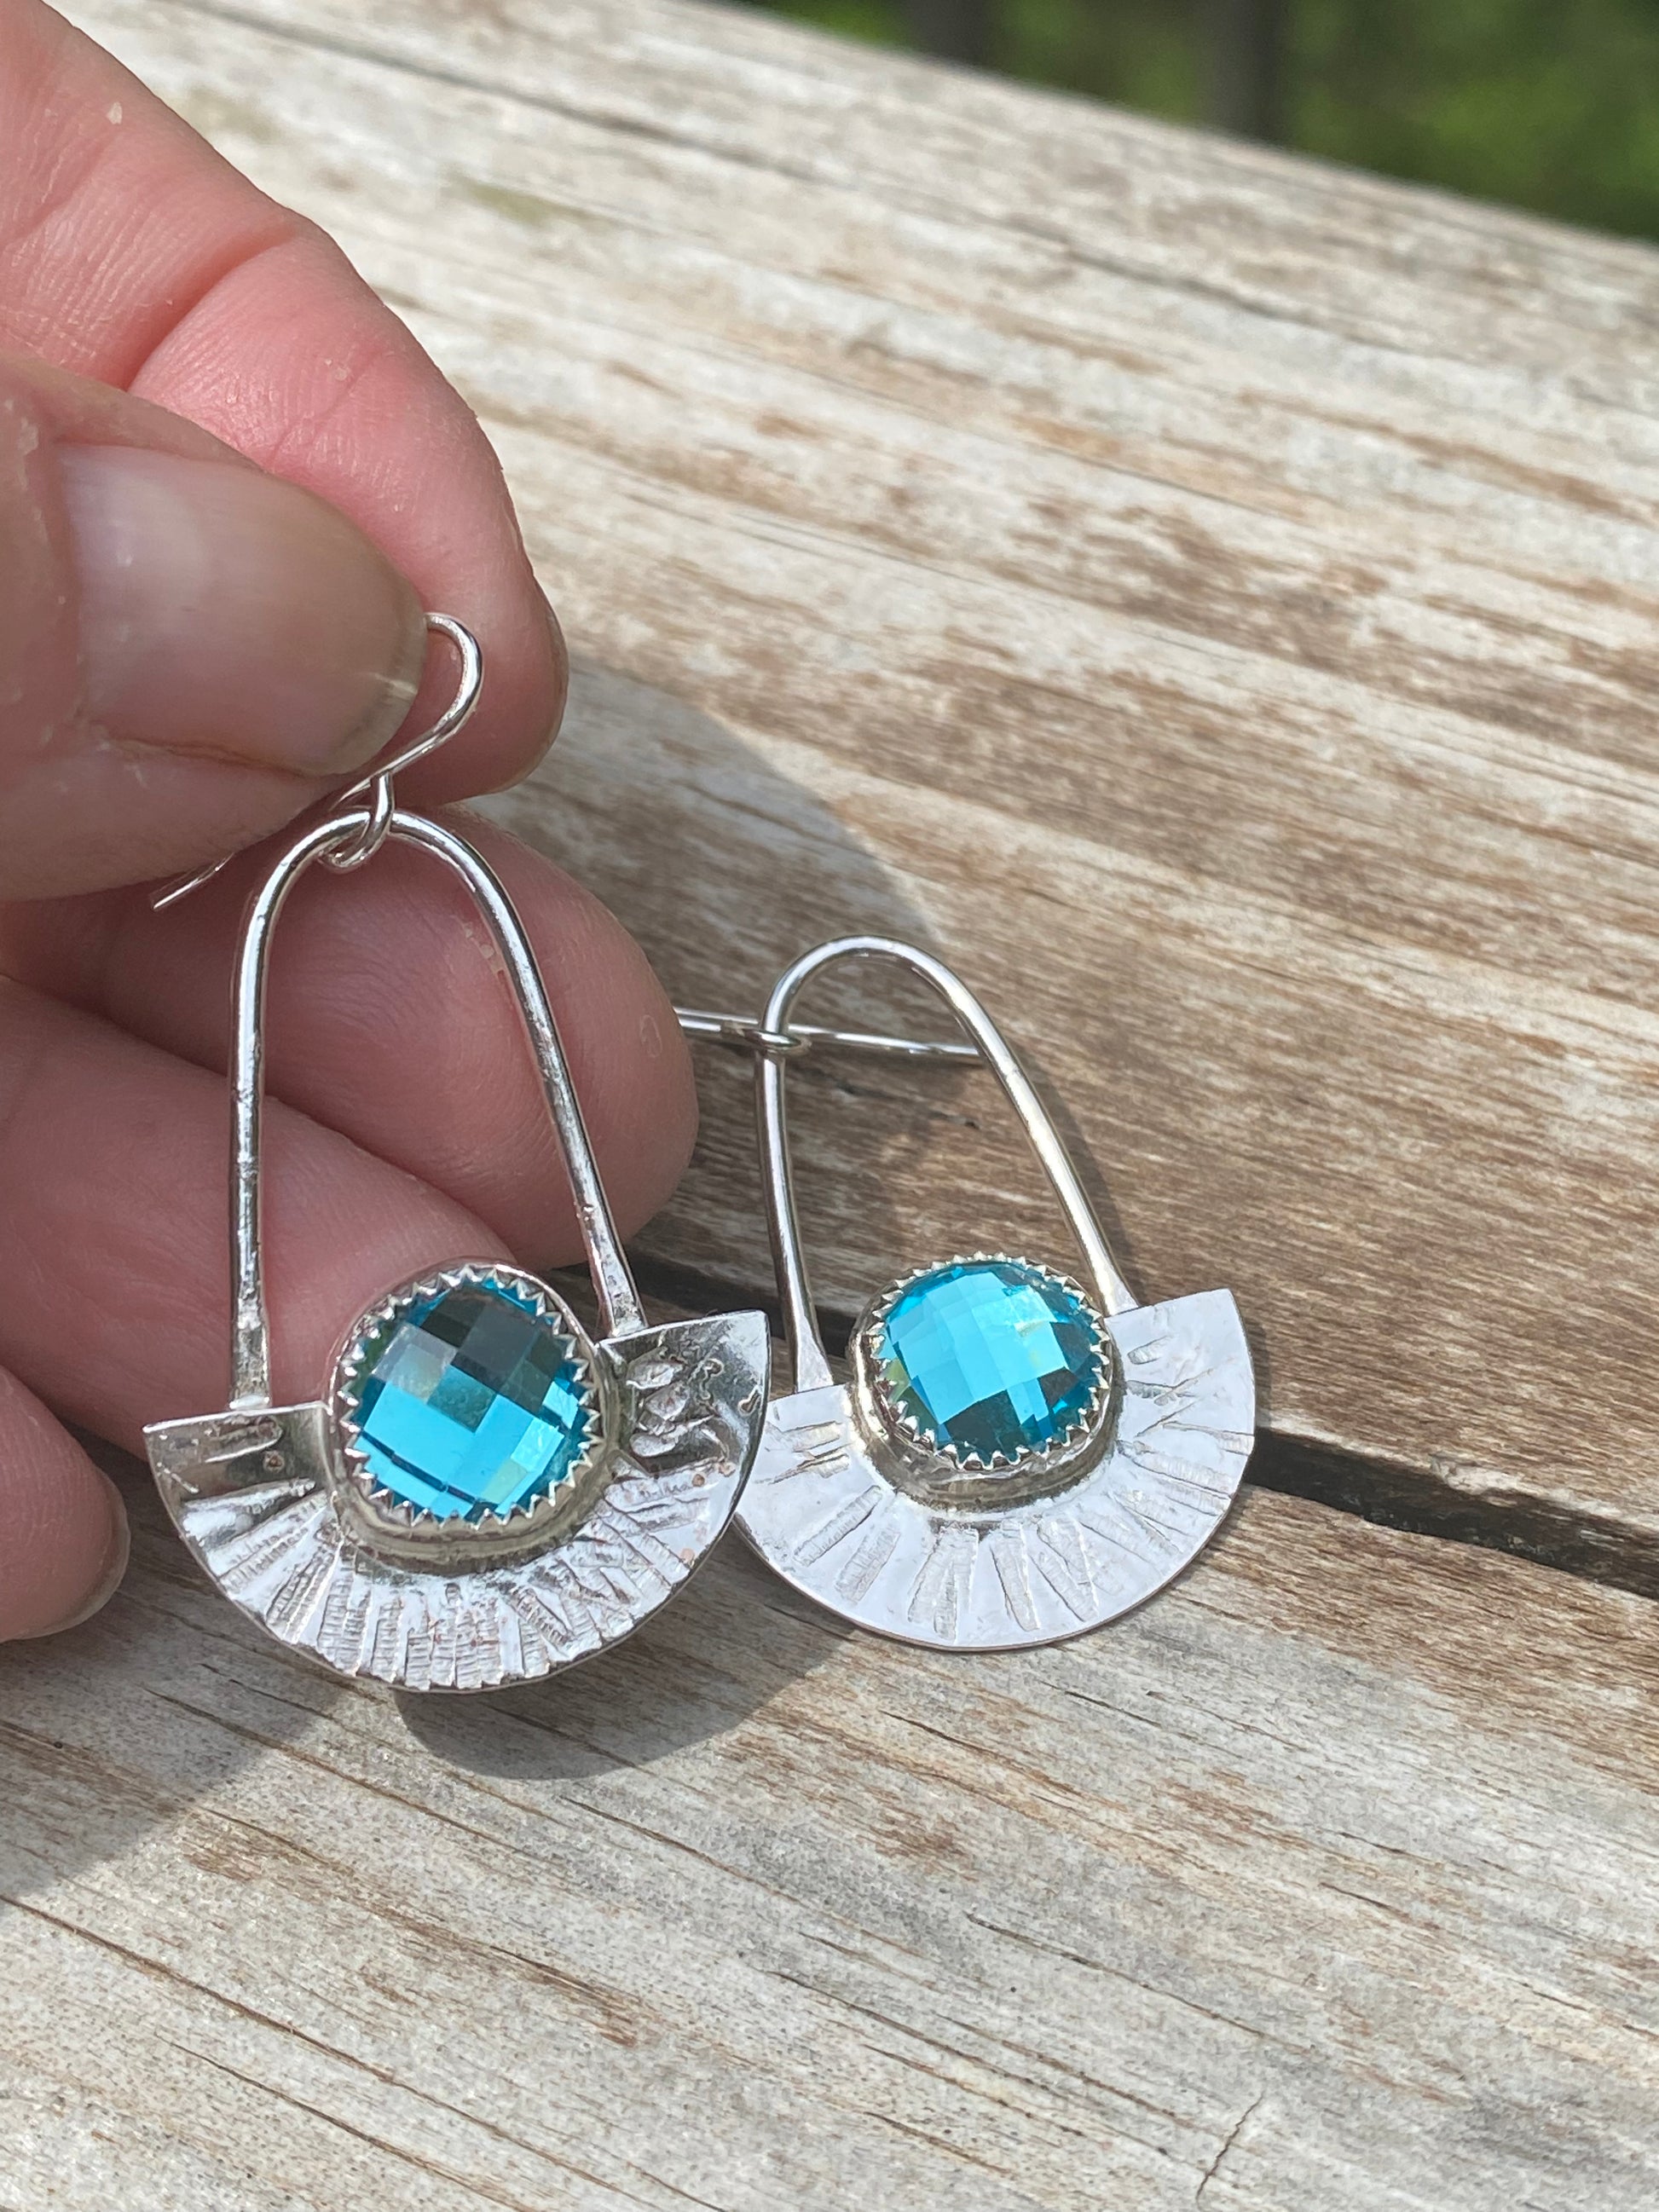 Blue Rhinestone earrings - collectionsbytracy.com